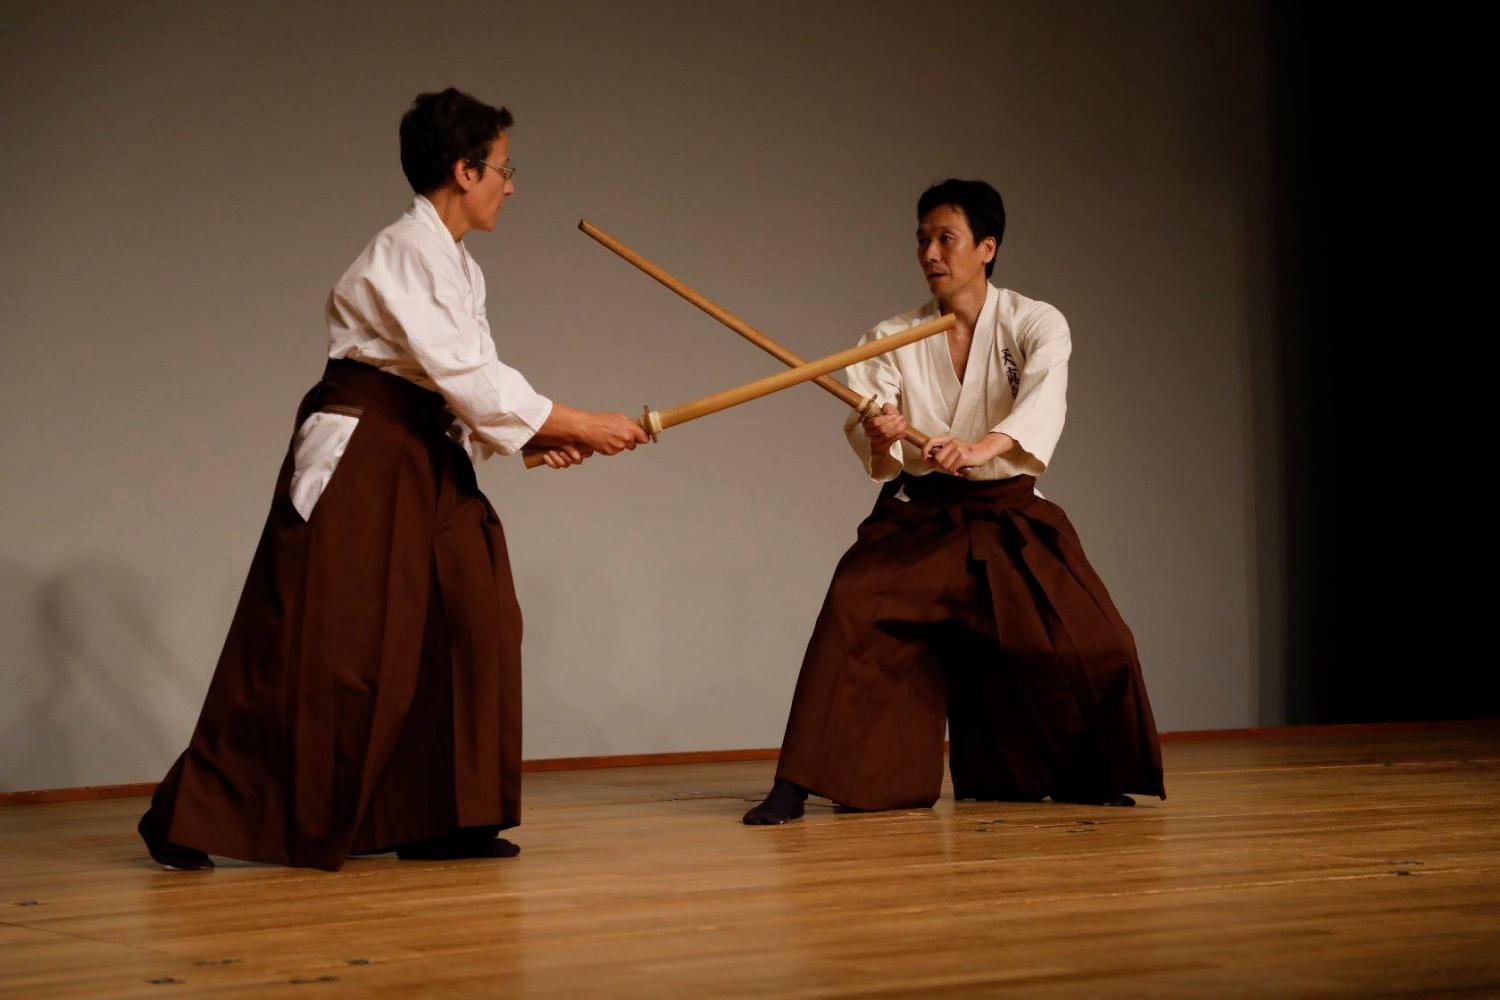 In Kenbu Tenshinryu, we practice katas (forms) and also kumitachis (practice with a partner) with a wooden sword.